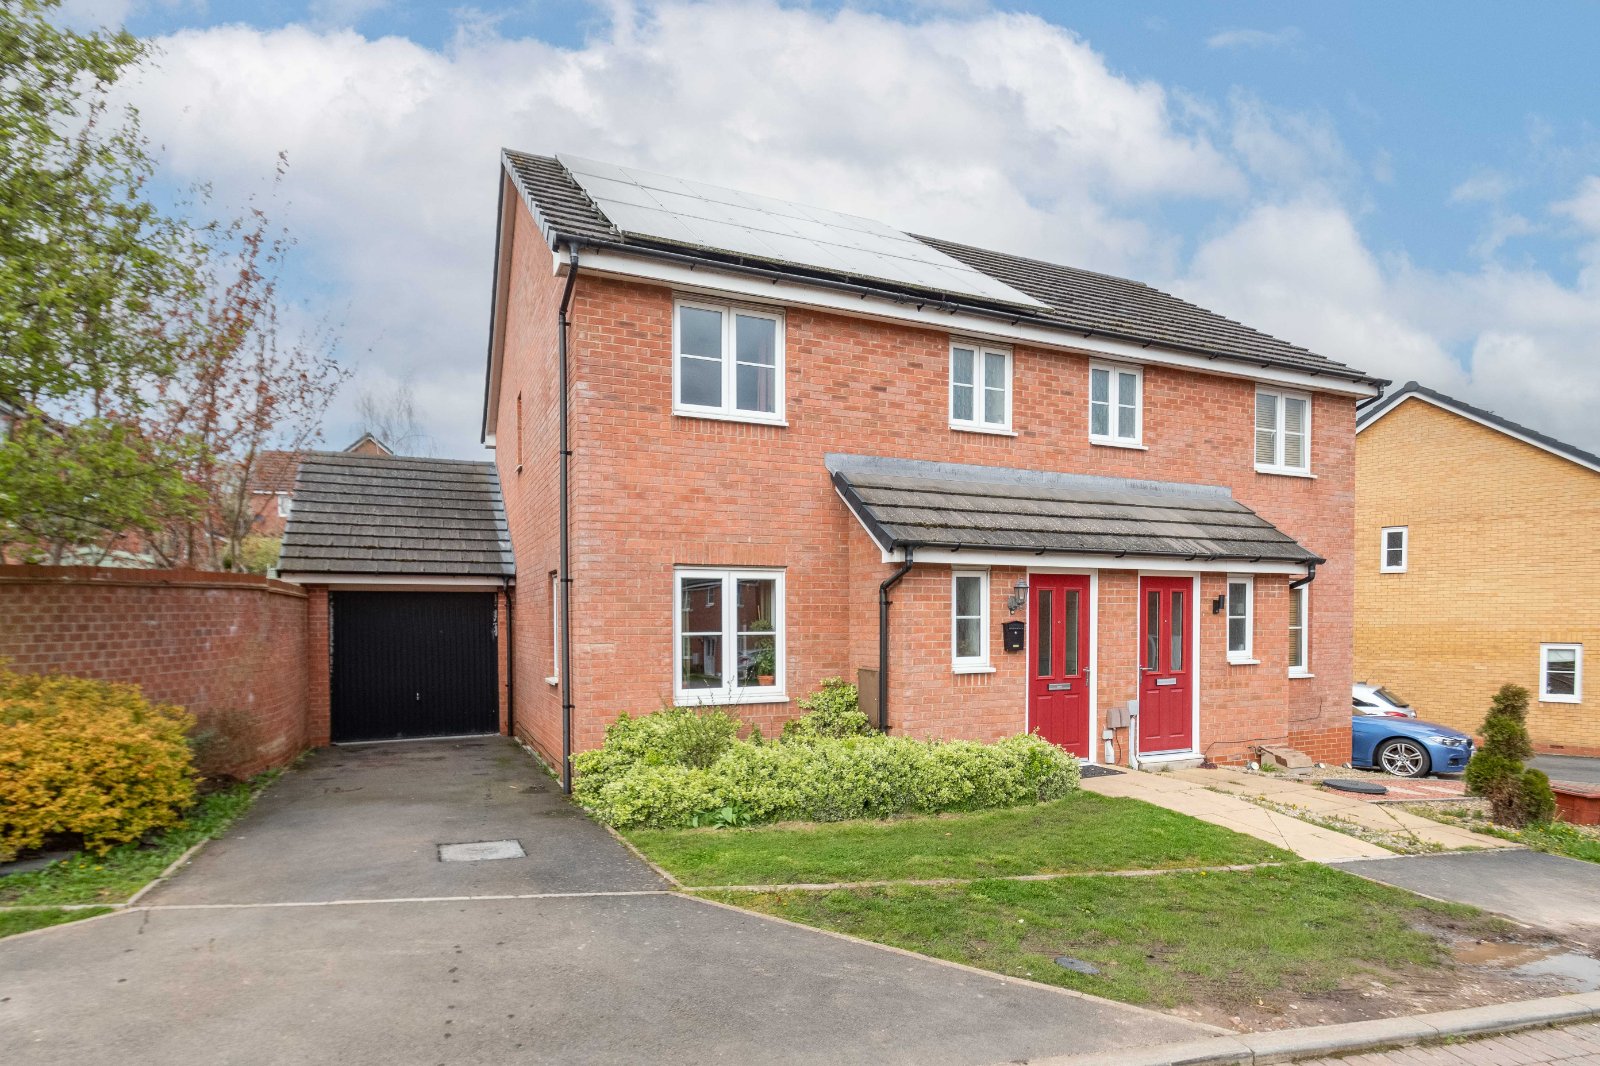 3 bed house for sale in Fairweather Close, Redditch  - Property Image 1